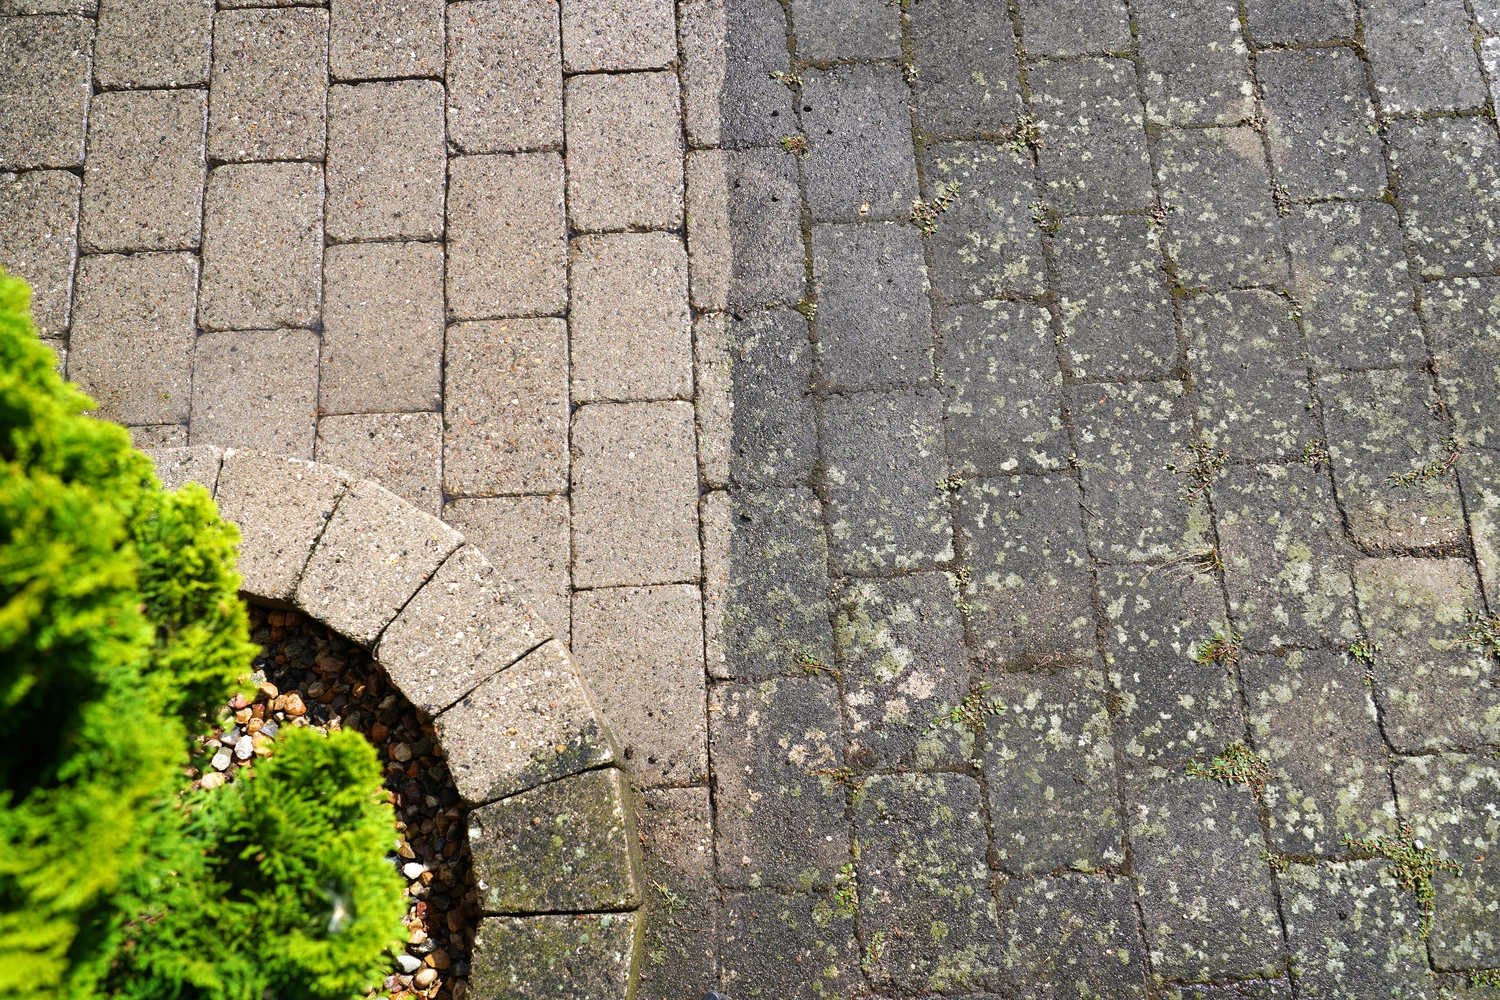 Interlocked brick work before and after being pressure washed